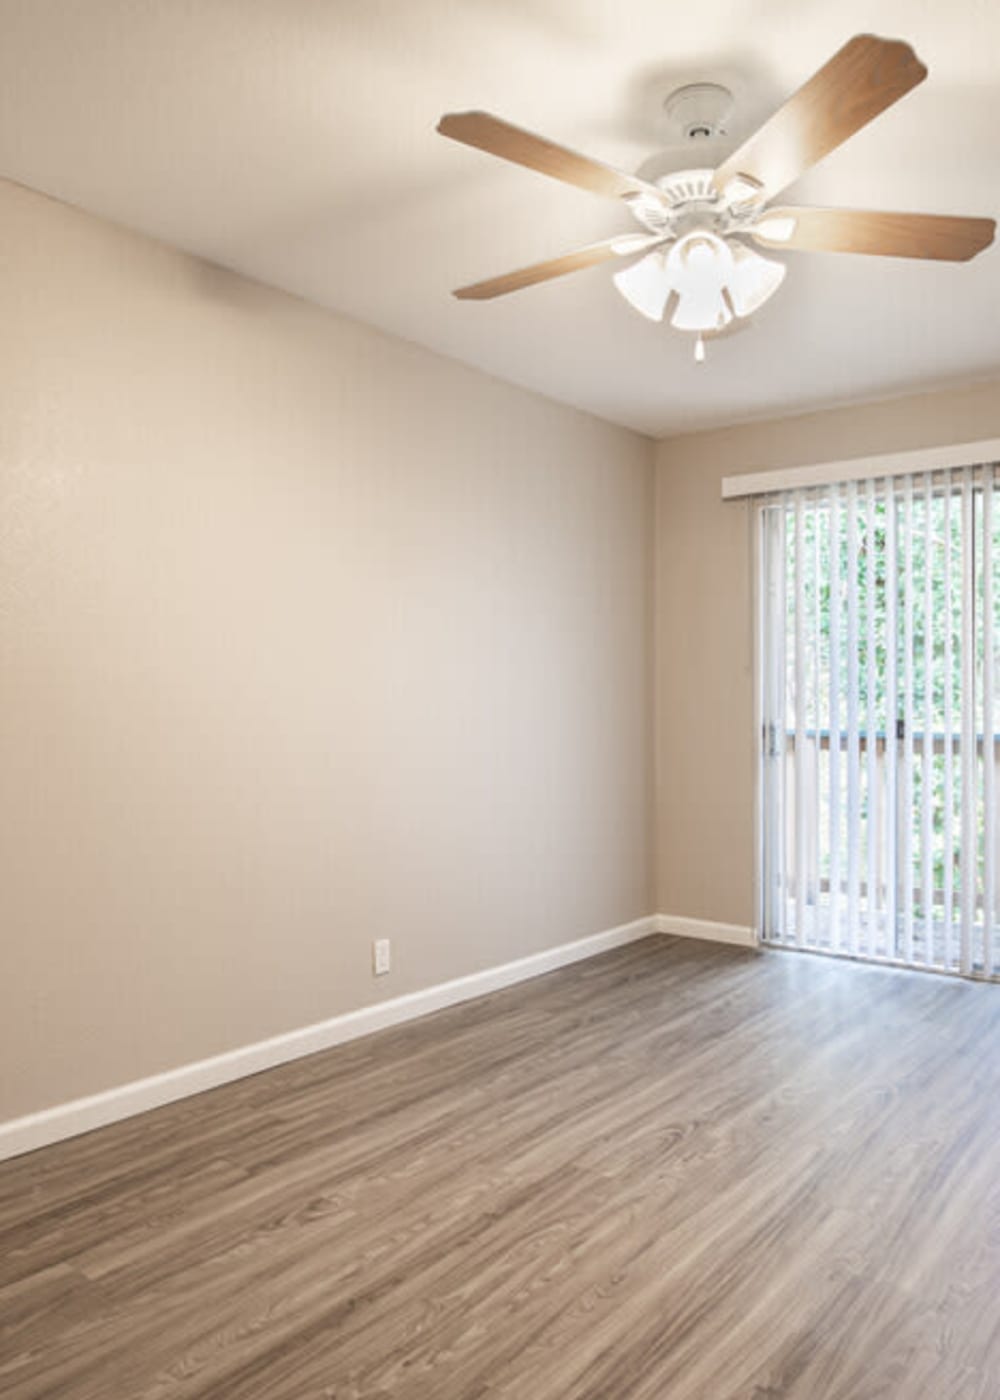 Apartments Walnut Creek, CA - Creekside Terrace - Unfurnished Living Area with Tan Walls, Sliding Door to Balcony, Ceiling Fan, and Plank Wood Flooring